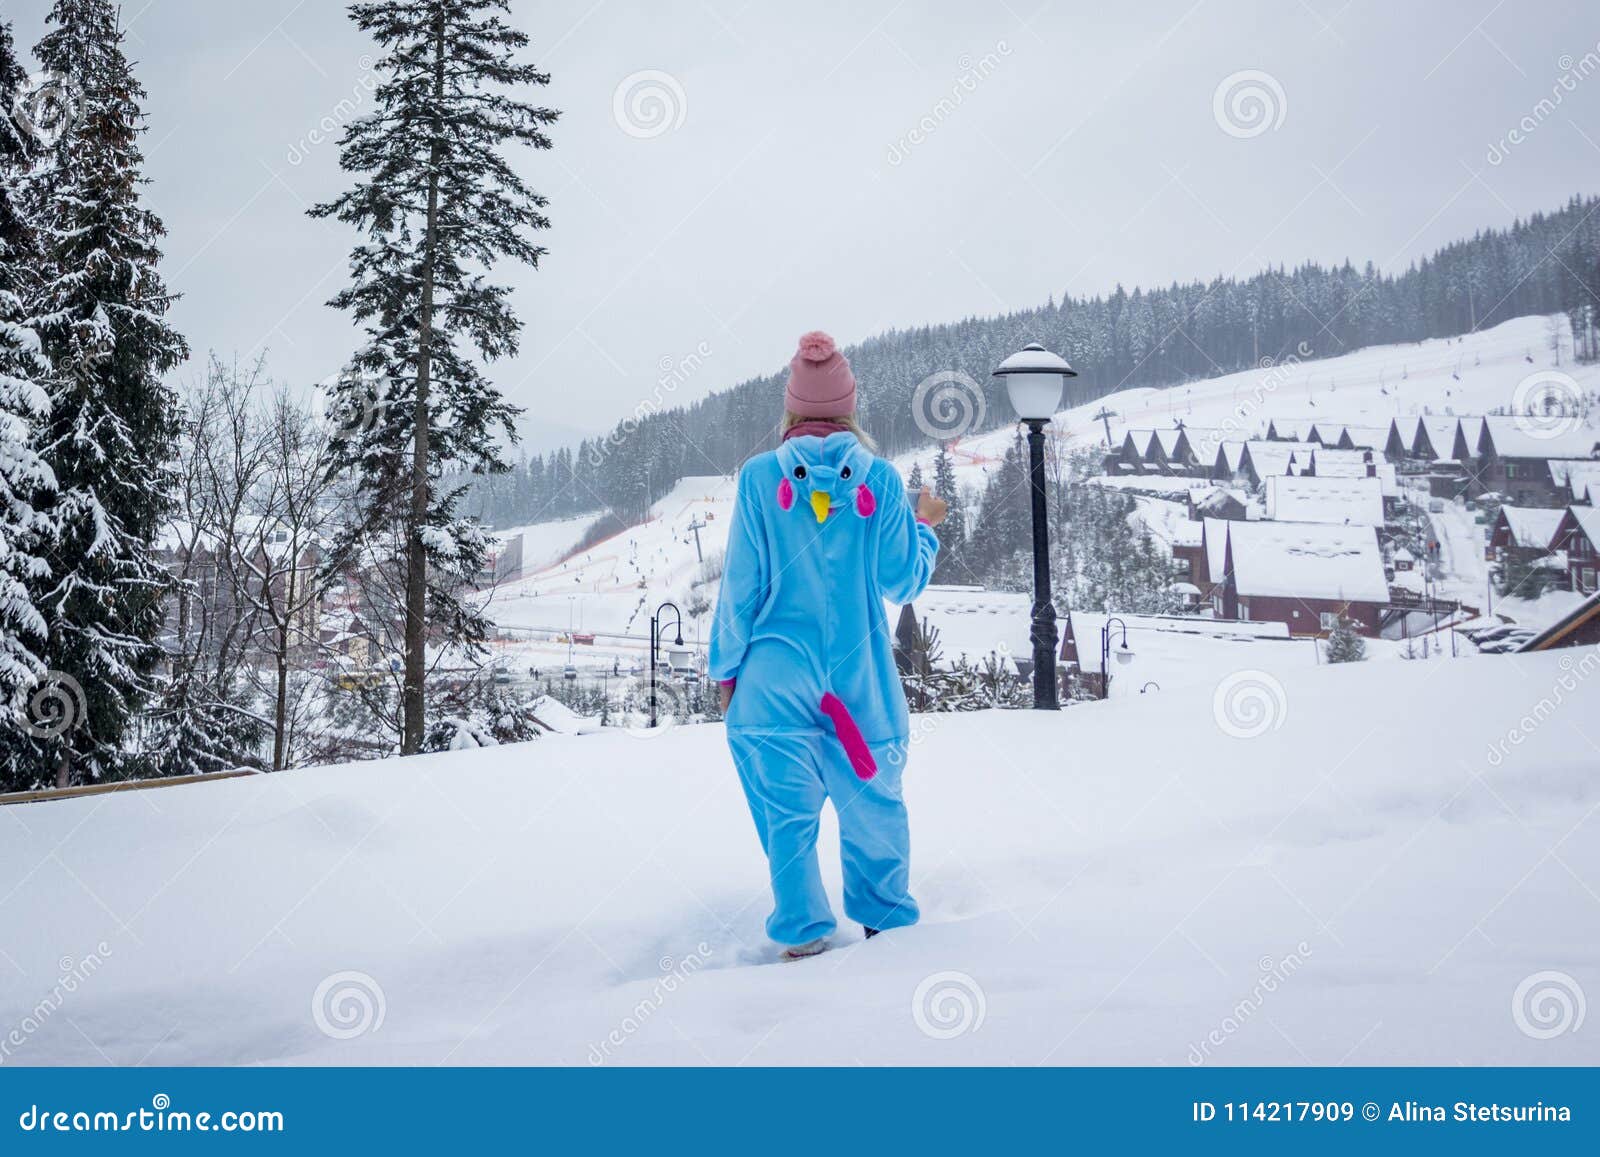 girl in blue, pink unicorn pijama kigurumi outdoor in front of the wood houses on the ski report in snow mountains.